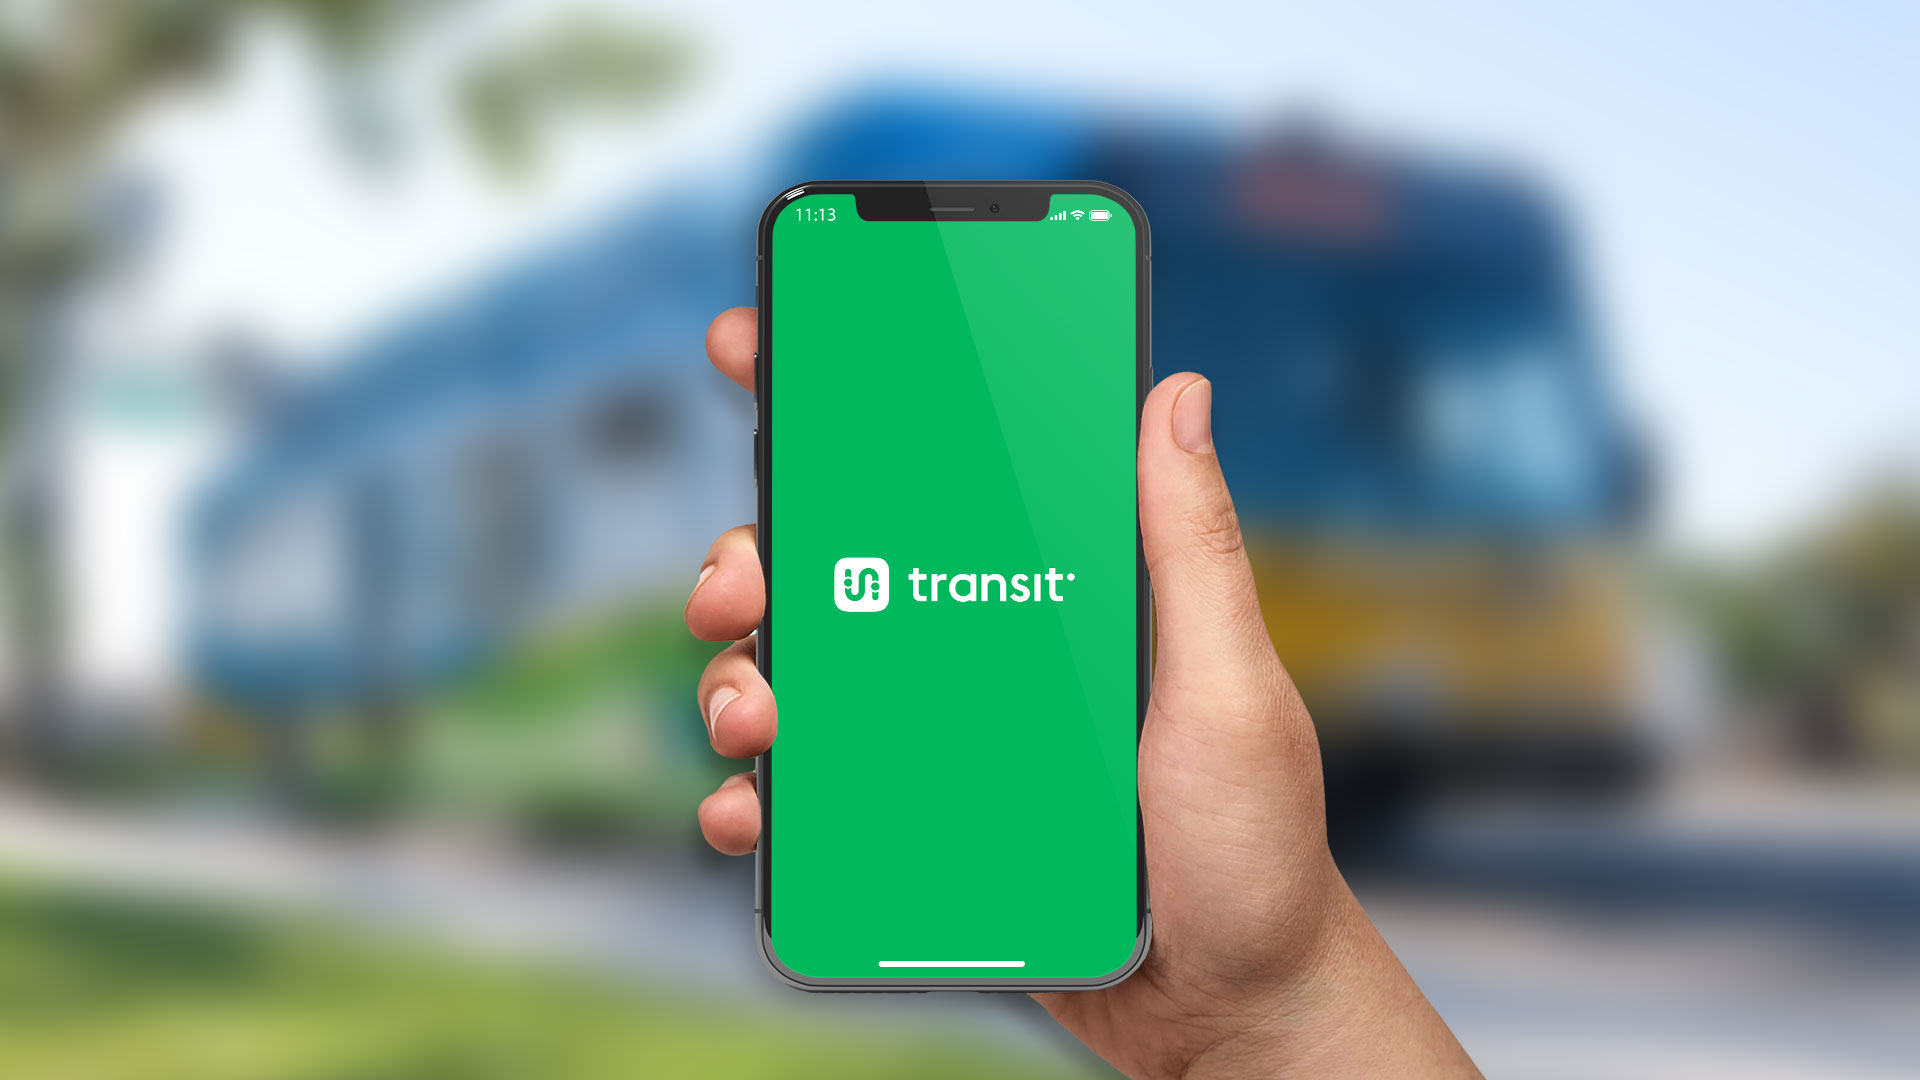 Golden Empire Transit names Transit as its Official App